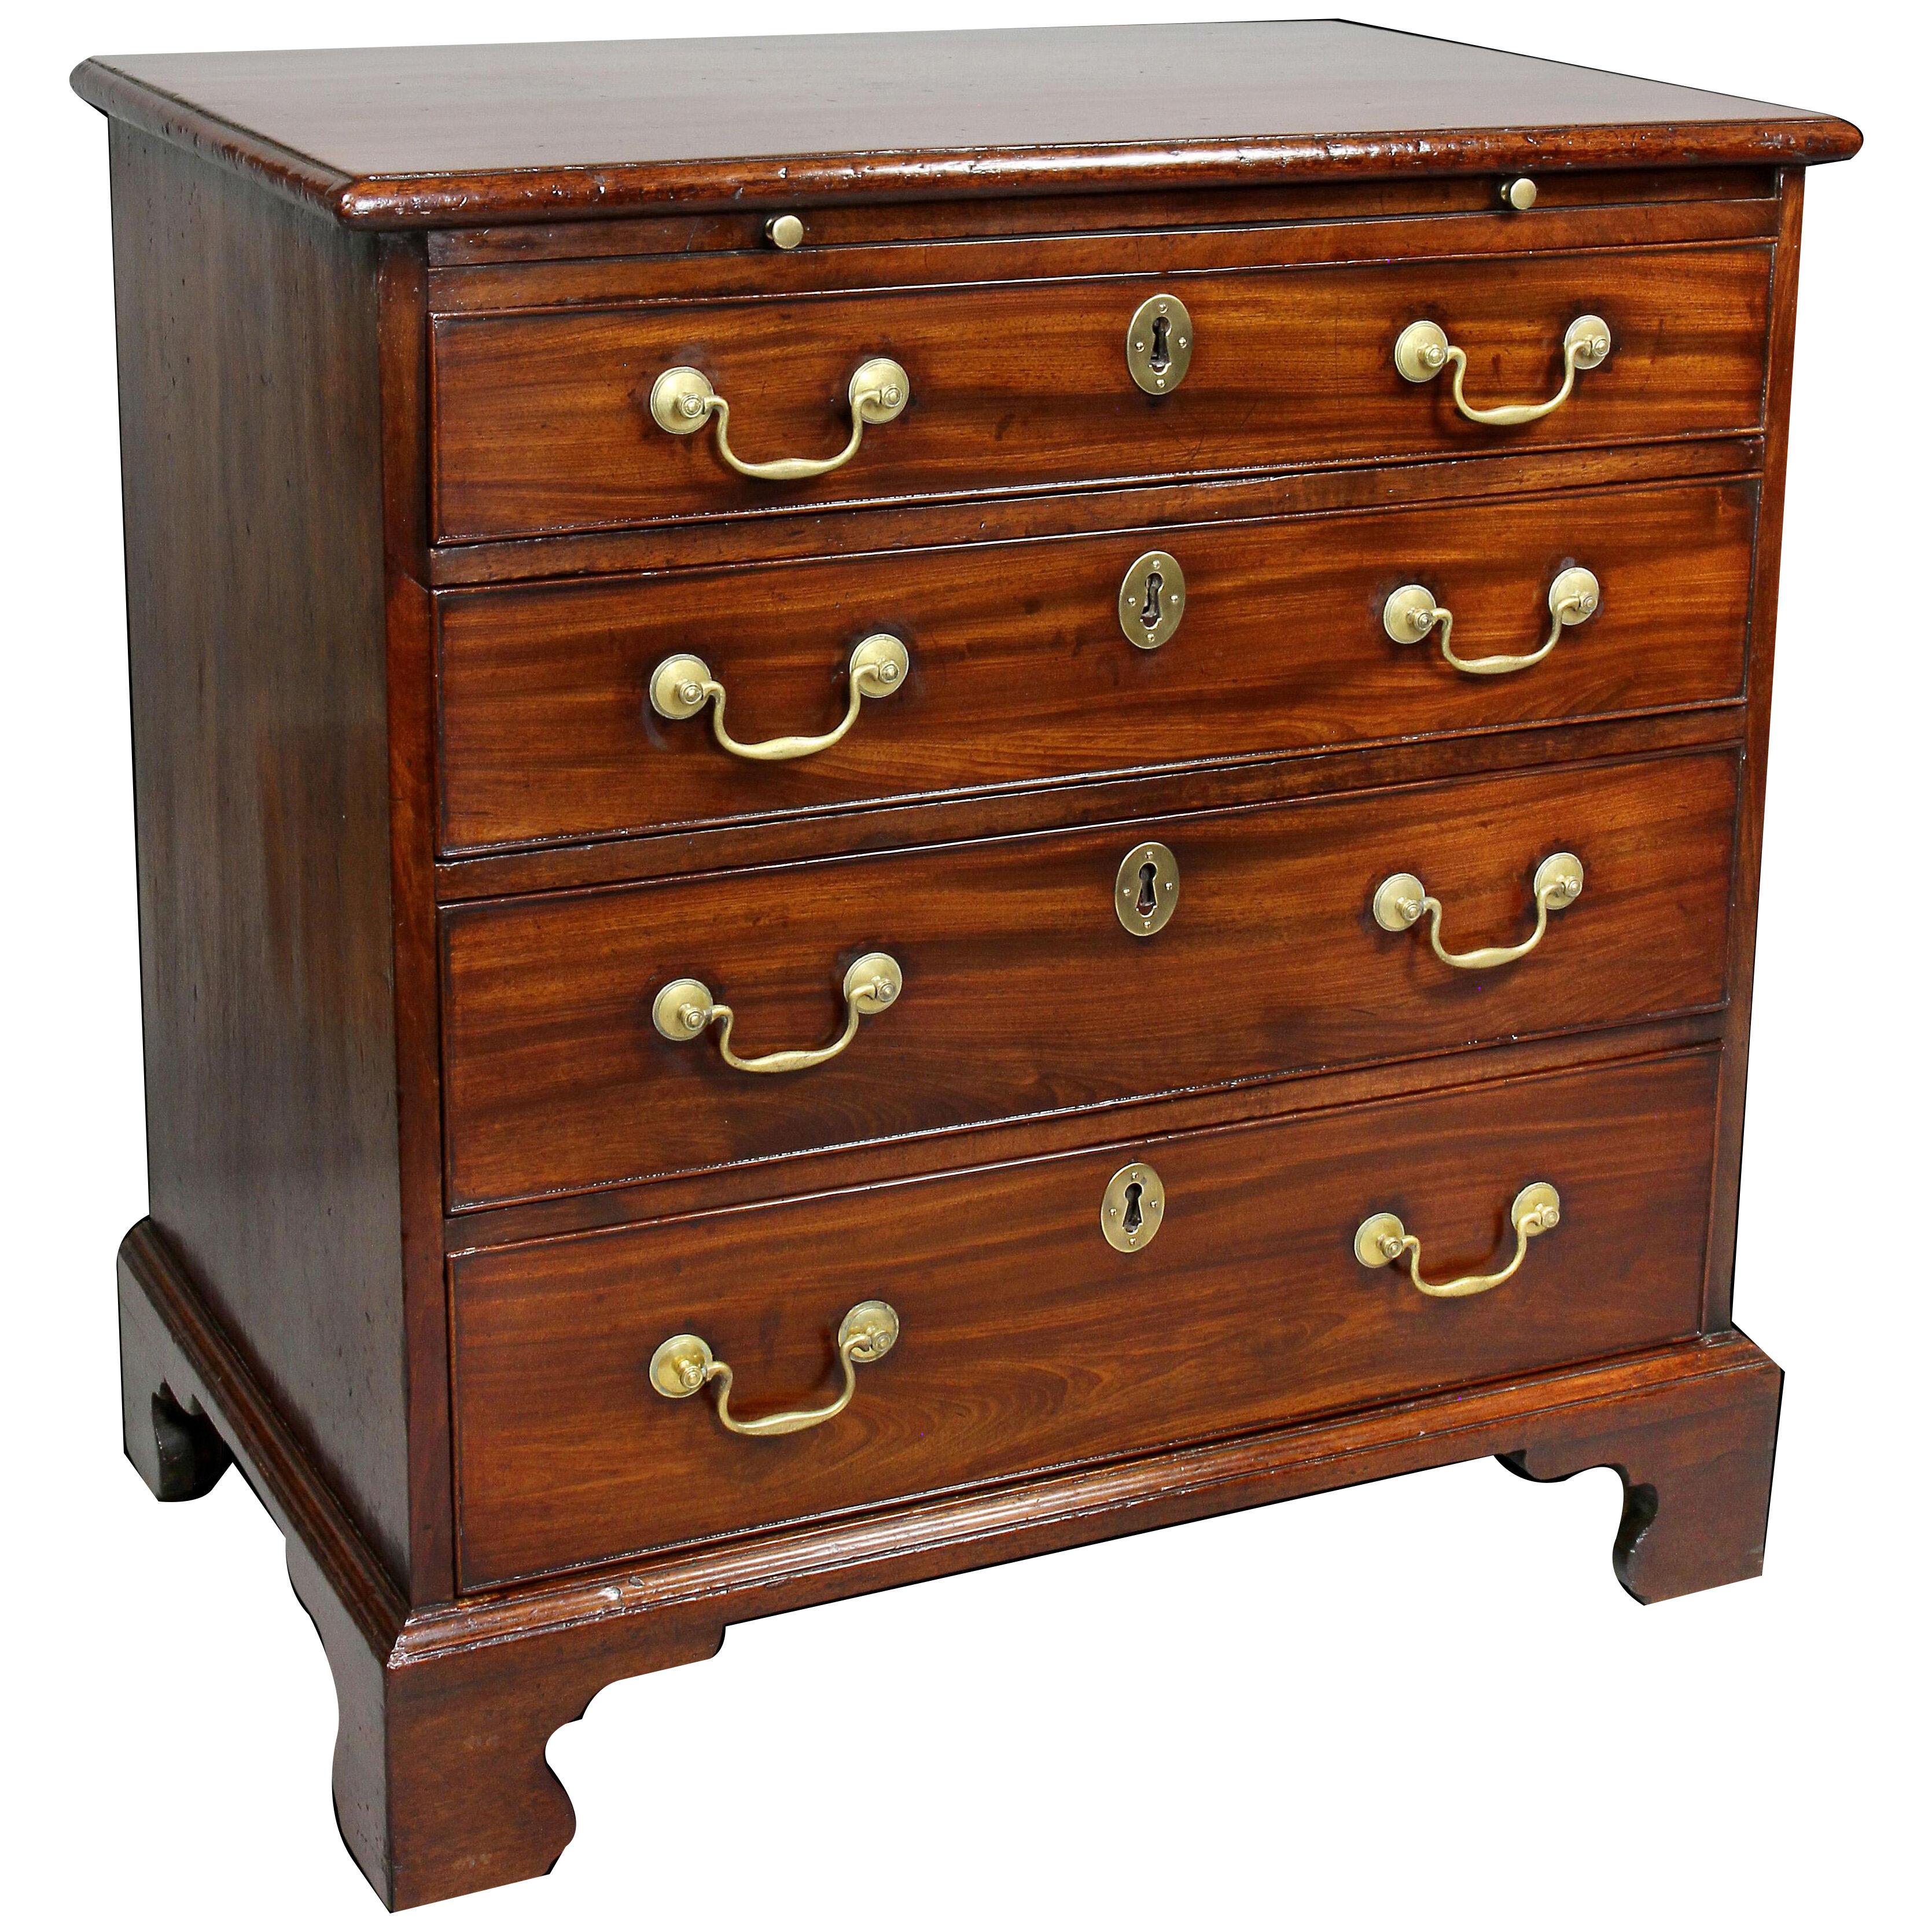 Late 18th Century George III Mahogany Bachelors Chest of Drawers